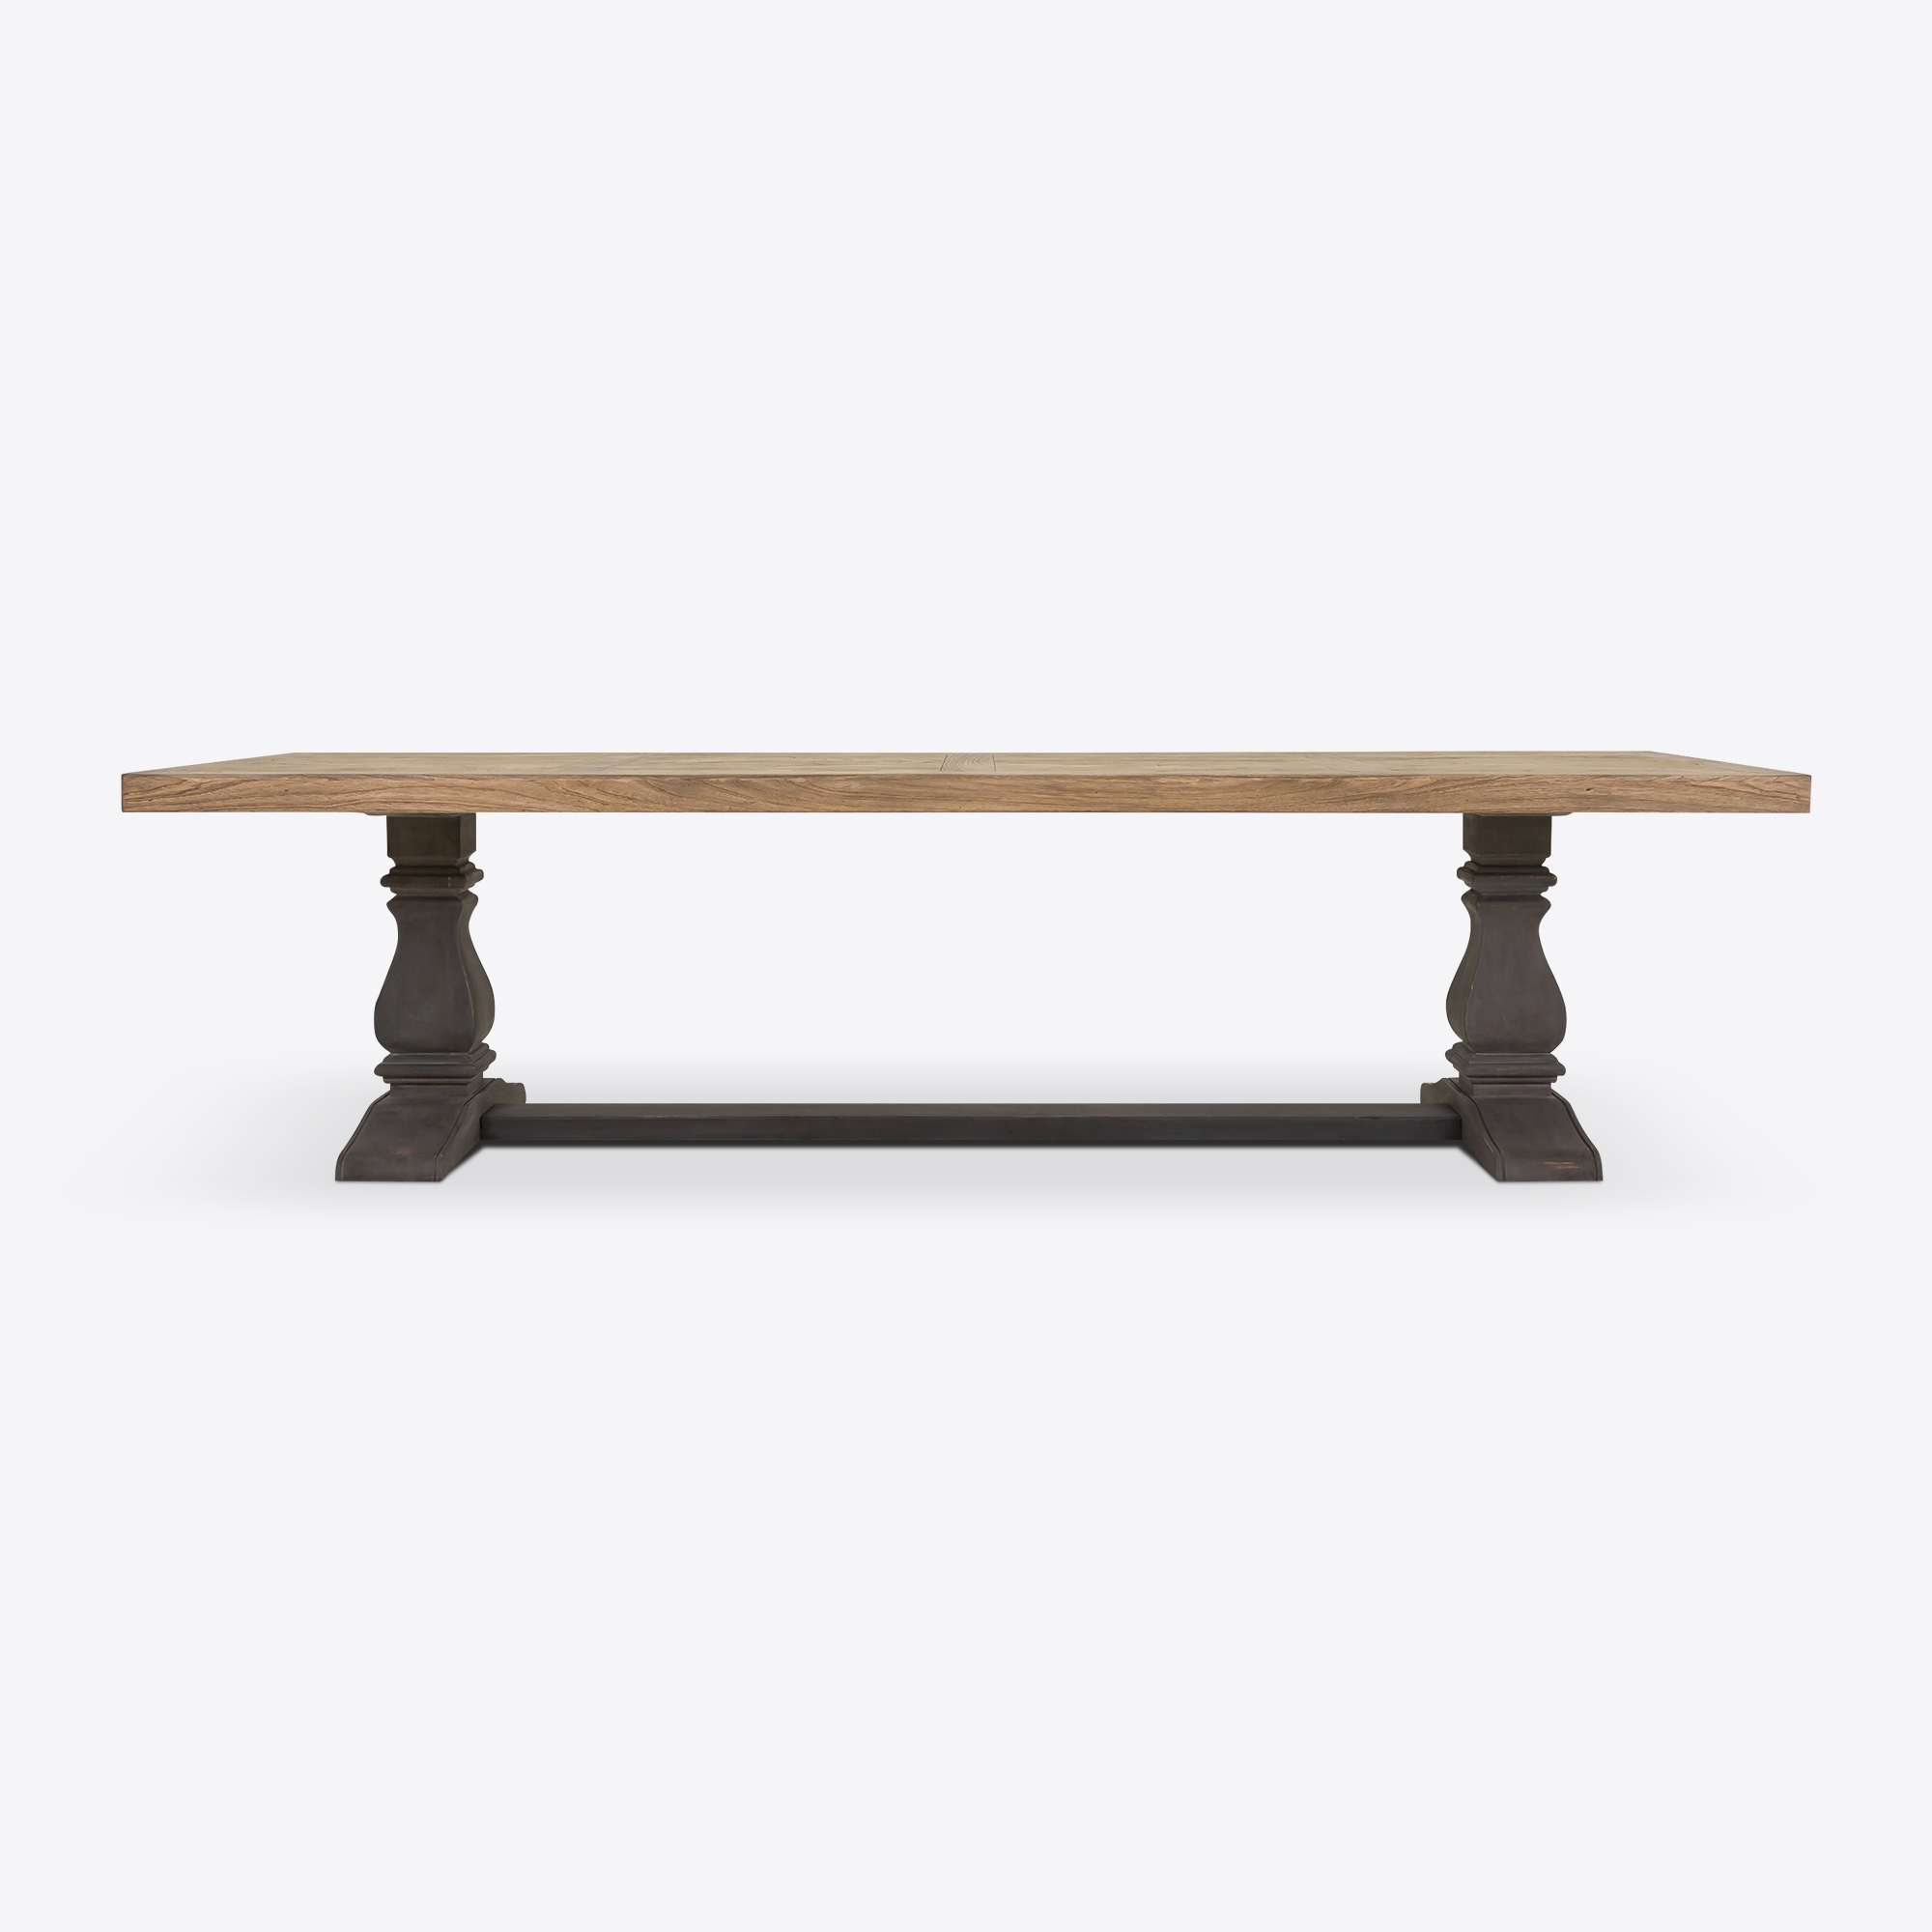 Ascot Refectory Table 300cm oak wooden dining table farmhouse traditional